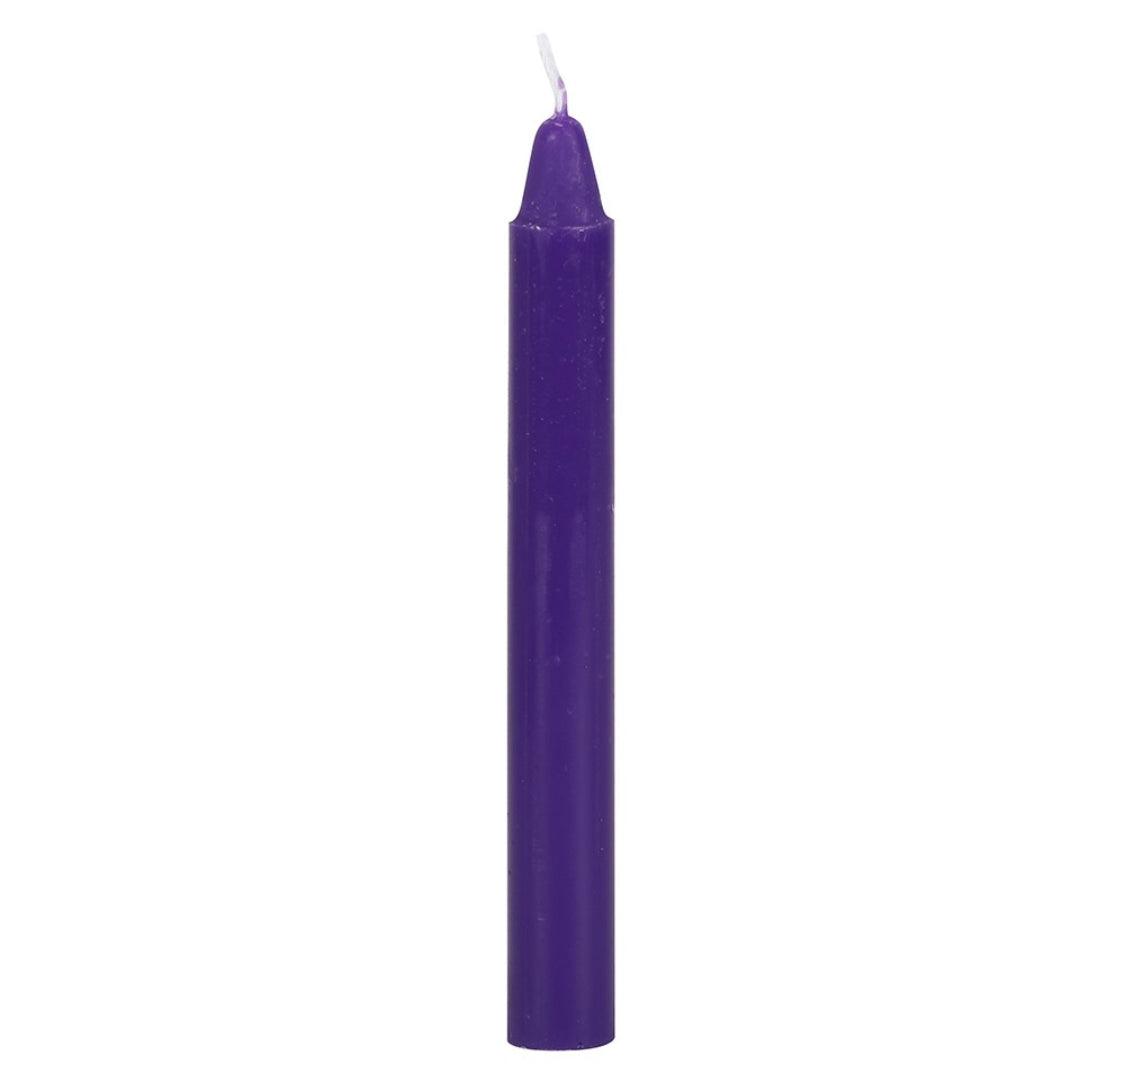 Peace and Prosperity Purple Spell Candles - Midnight Maker